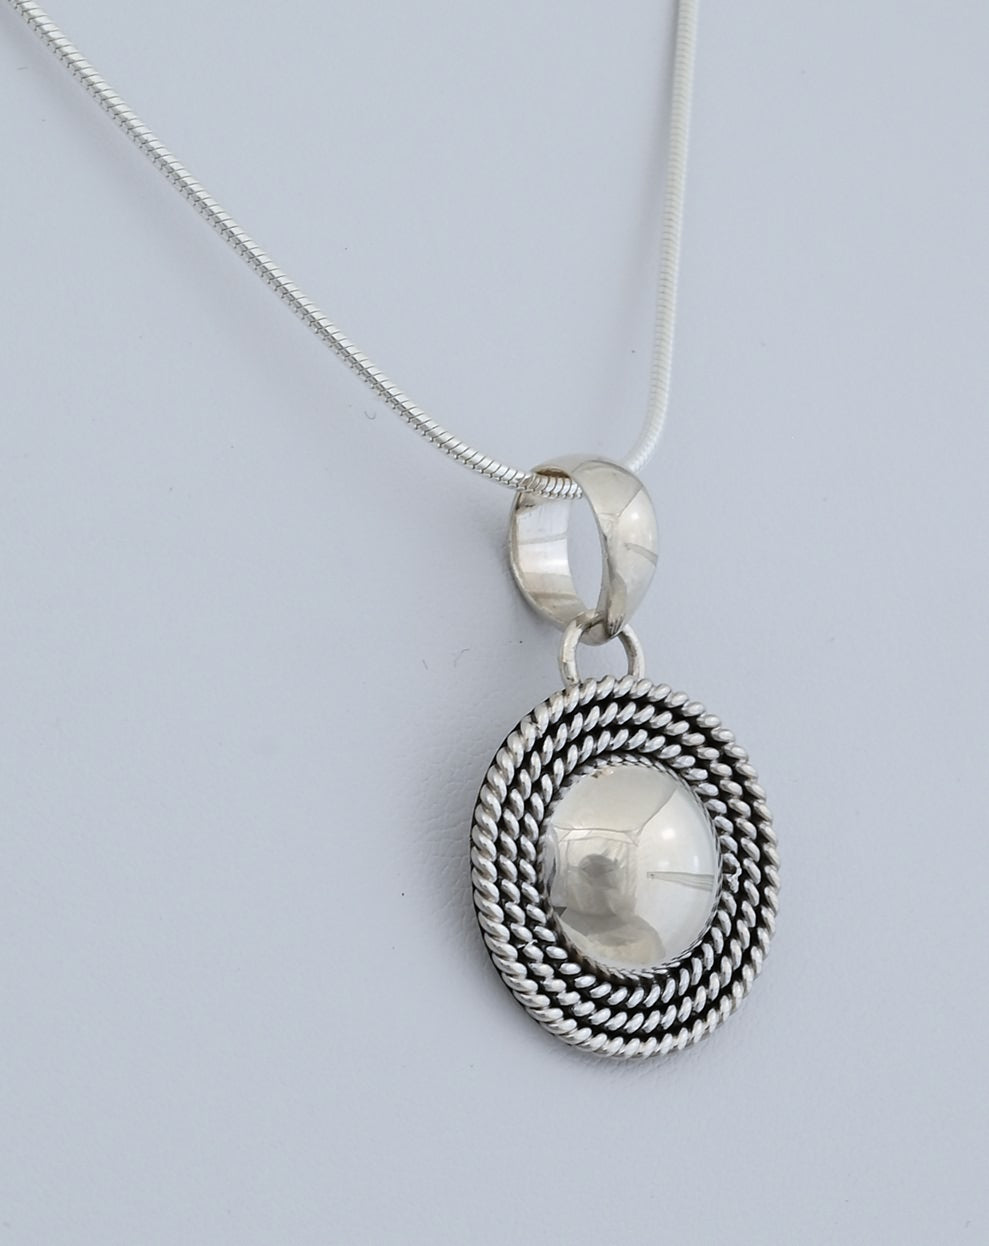 Pendant with Dome and Twists by Artie Yellowhorse